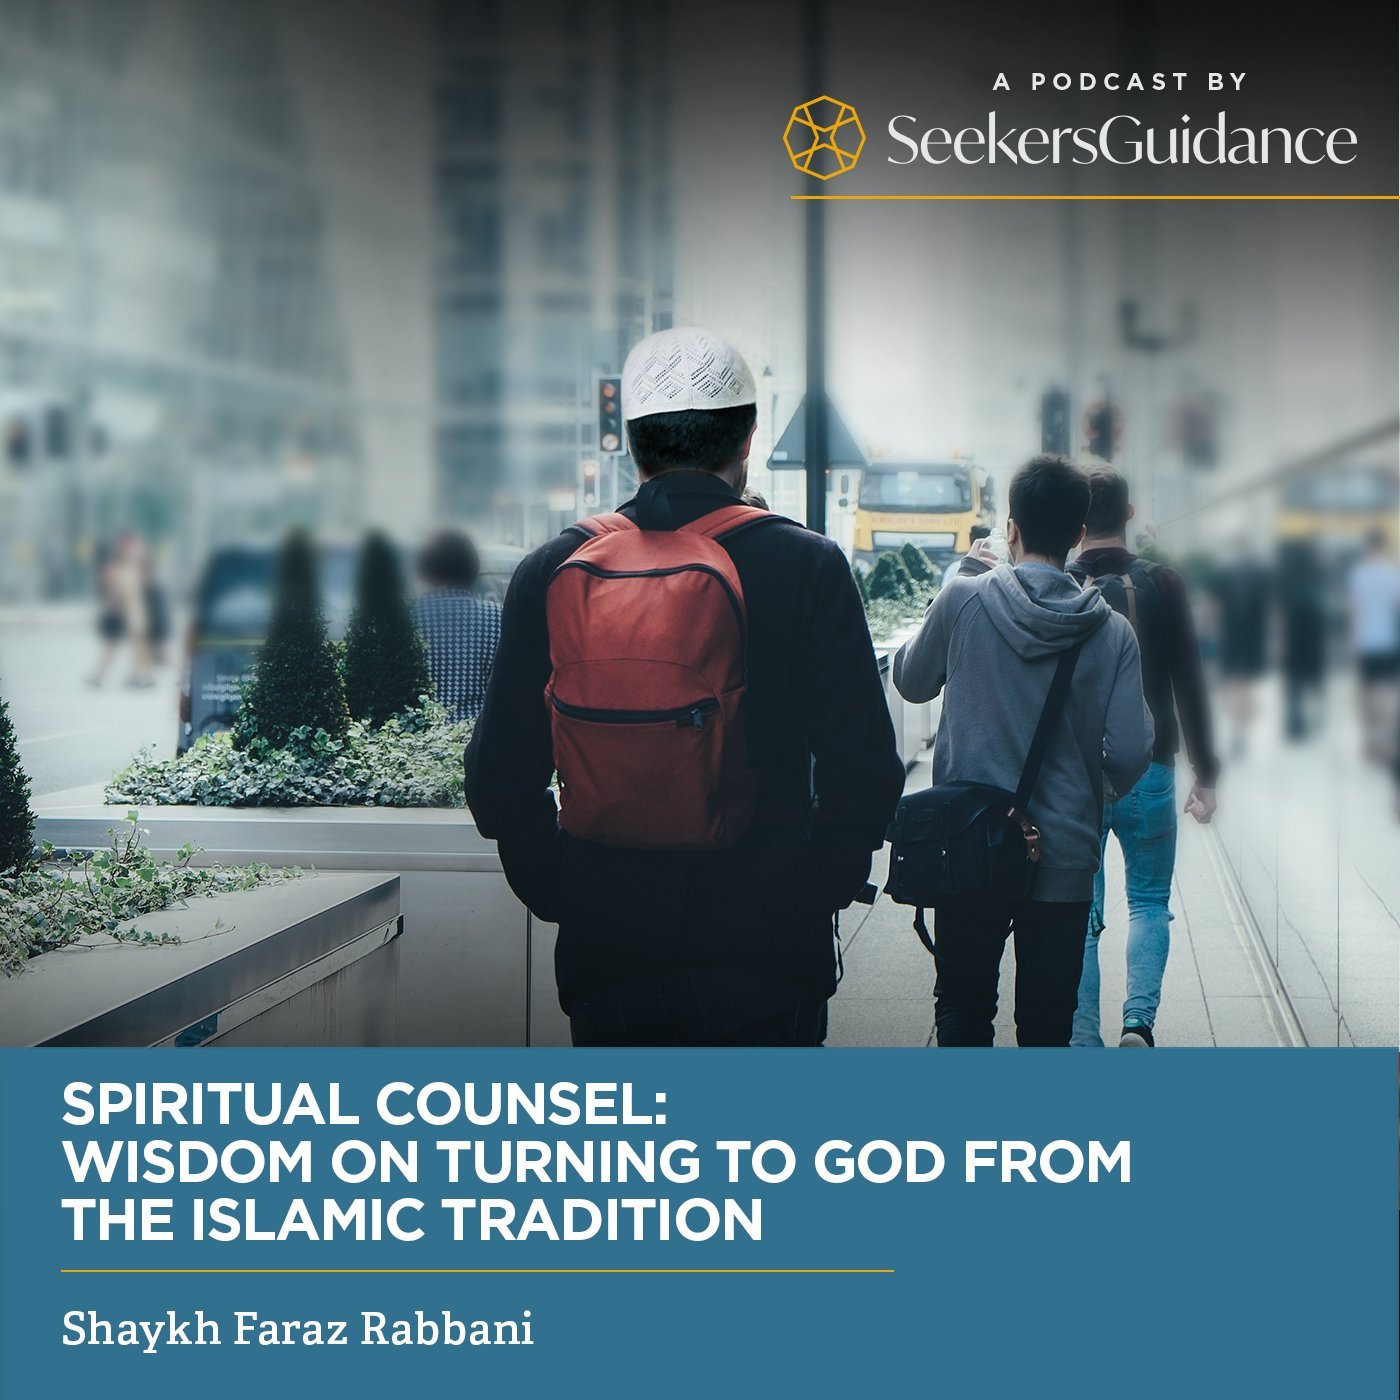 Spiritual Counsel: Wisdom on Turning to God from the Islamic Tradition